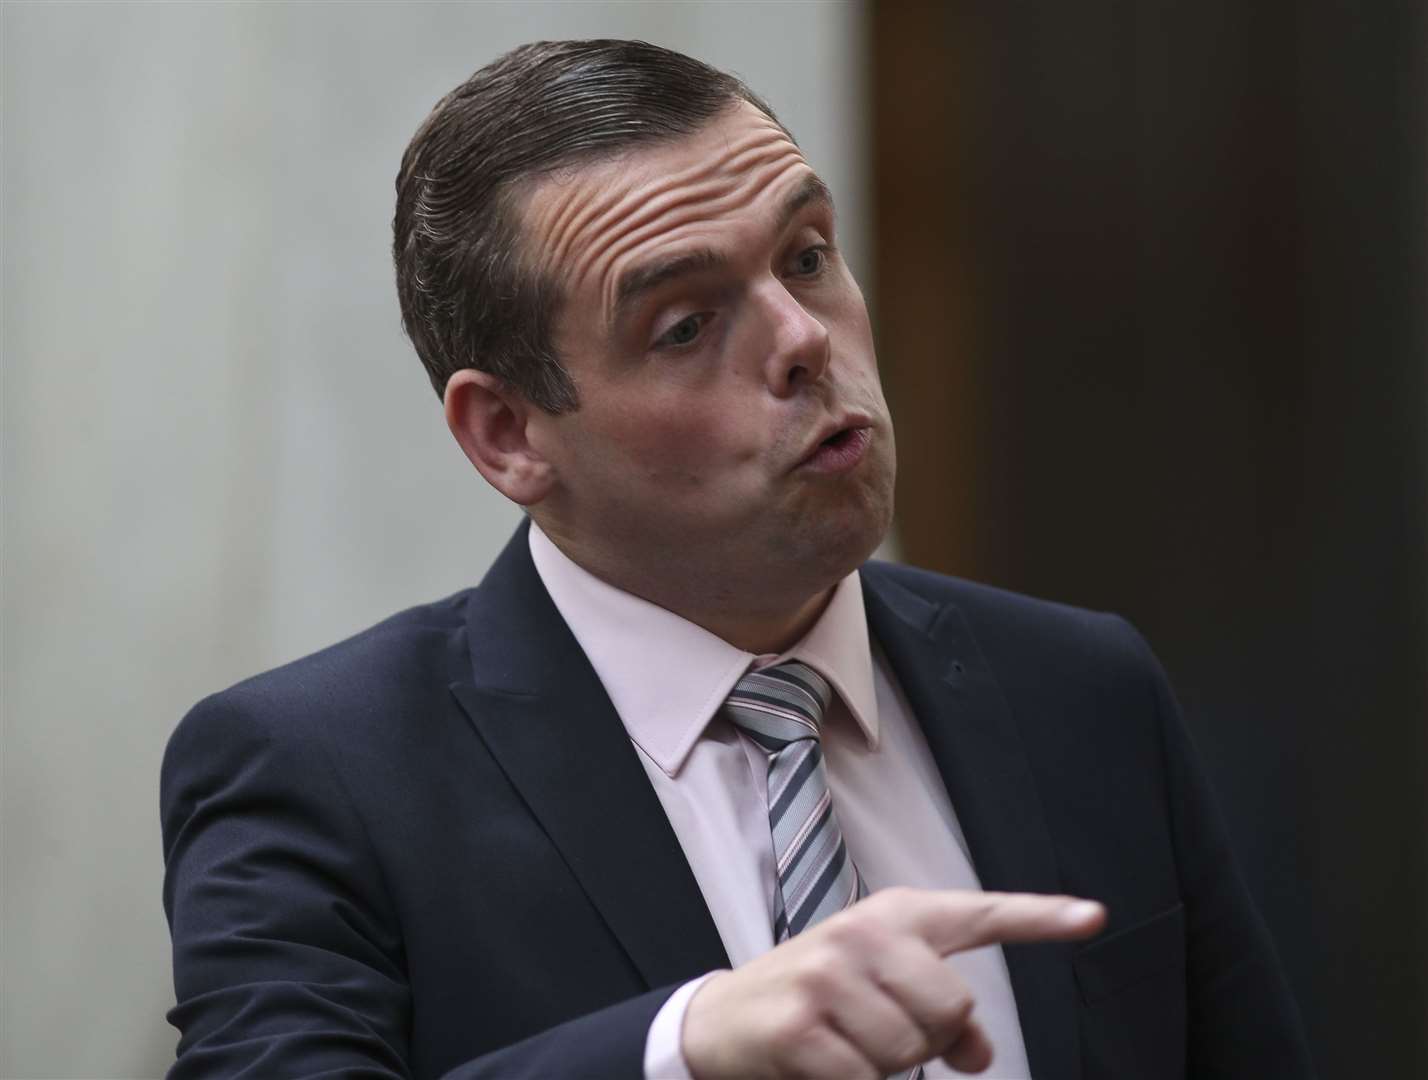 Scottish Conservative Leader Douglas Ross said he is due to speak with the Prime Minister following his comments on devolution (Fraser Bremner/Daily Mail)